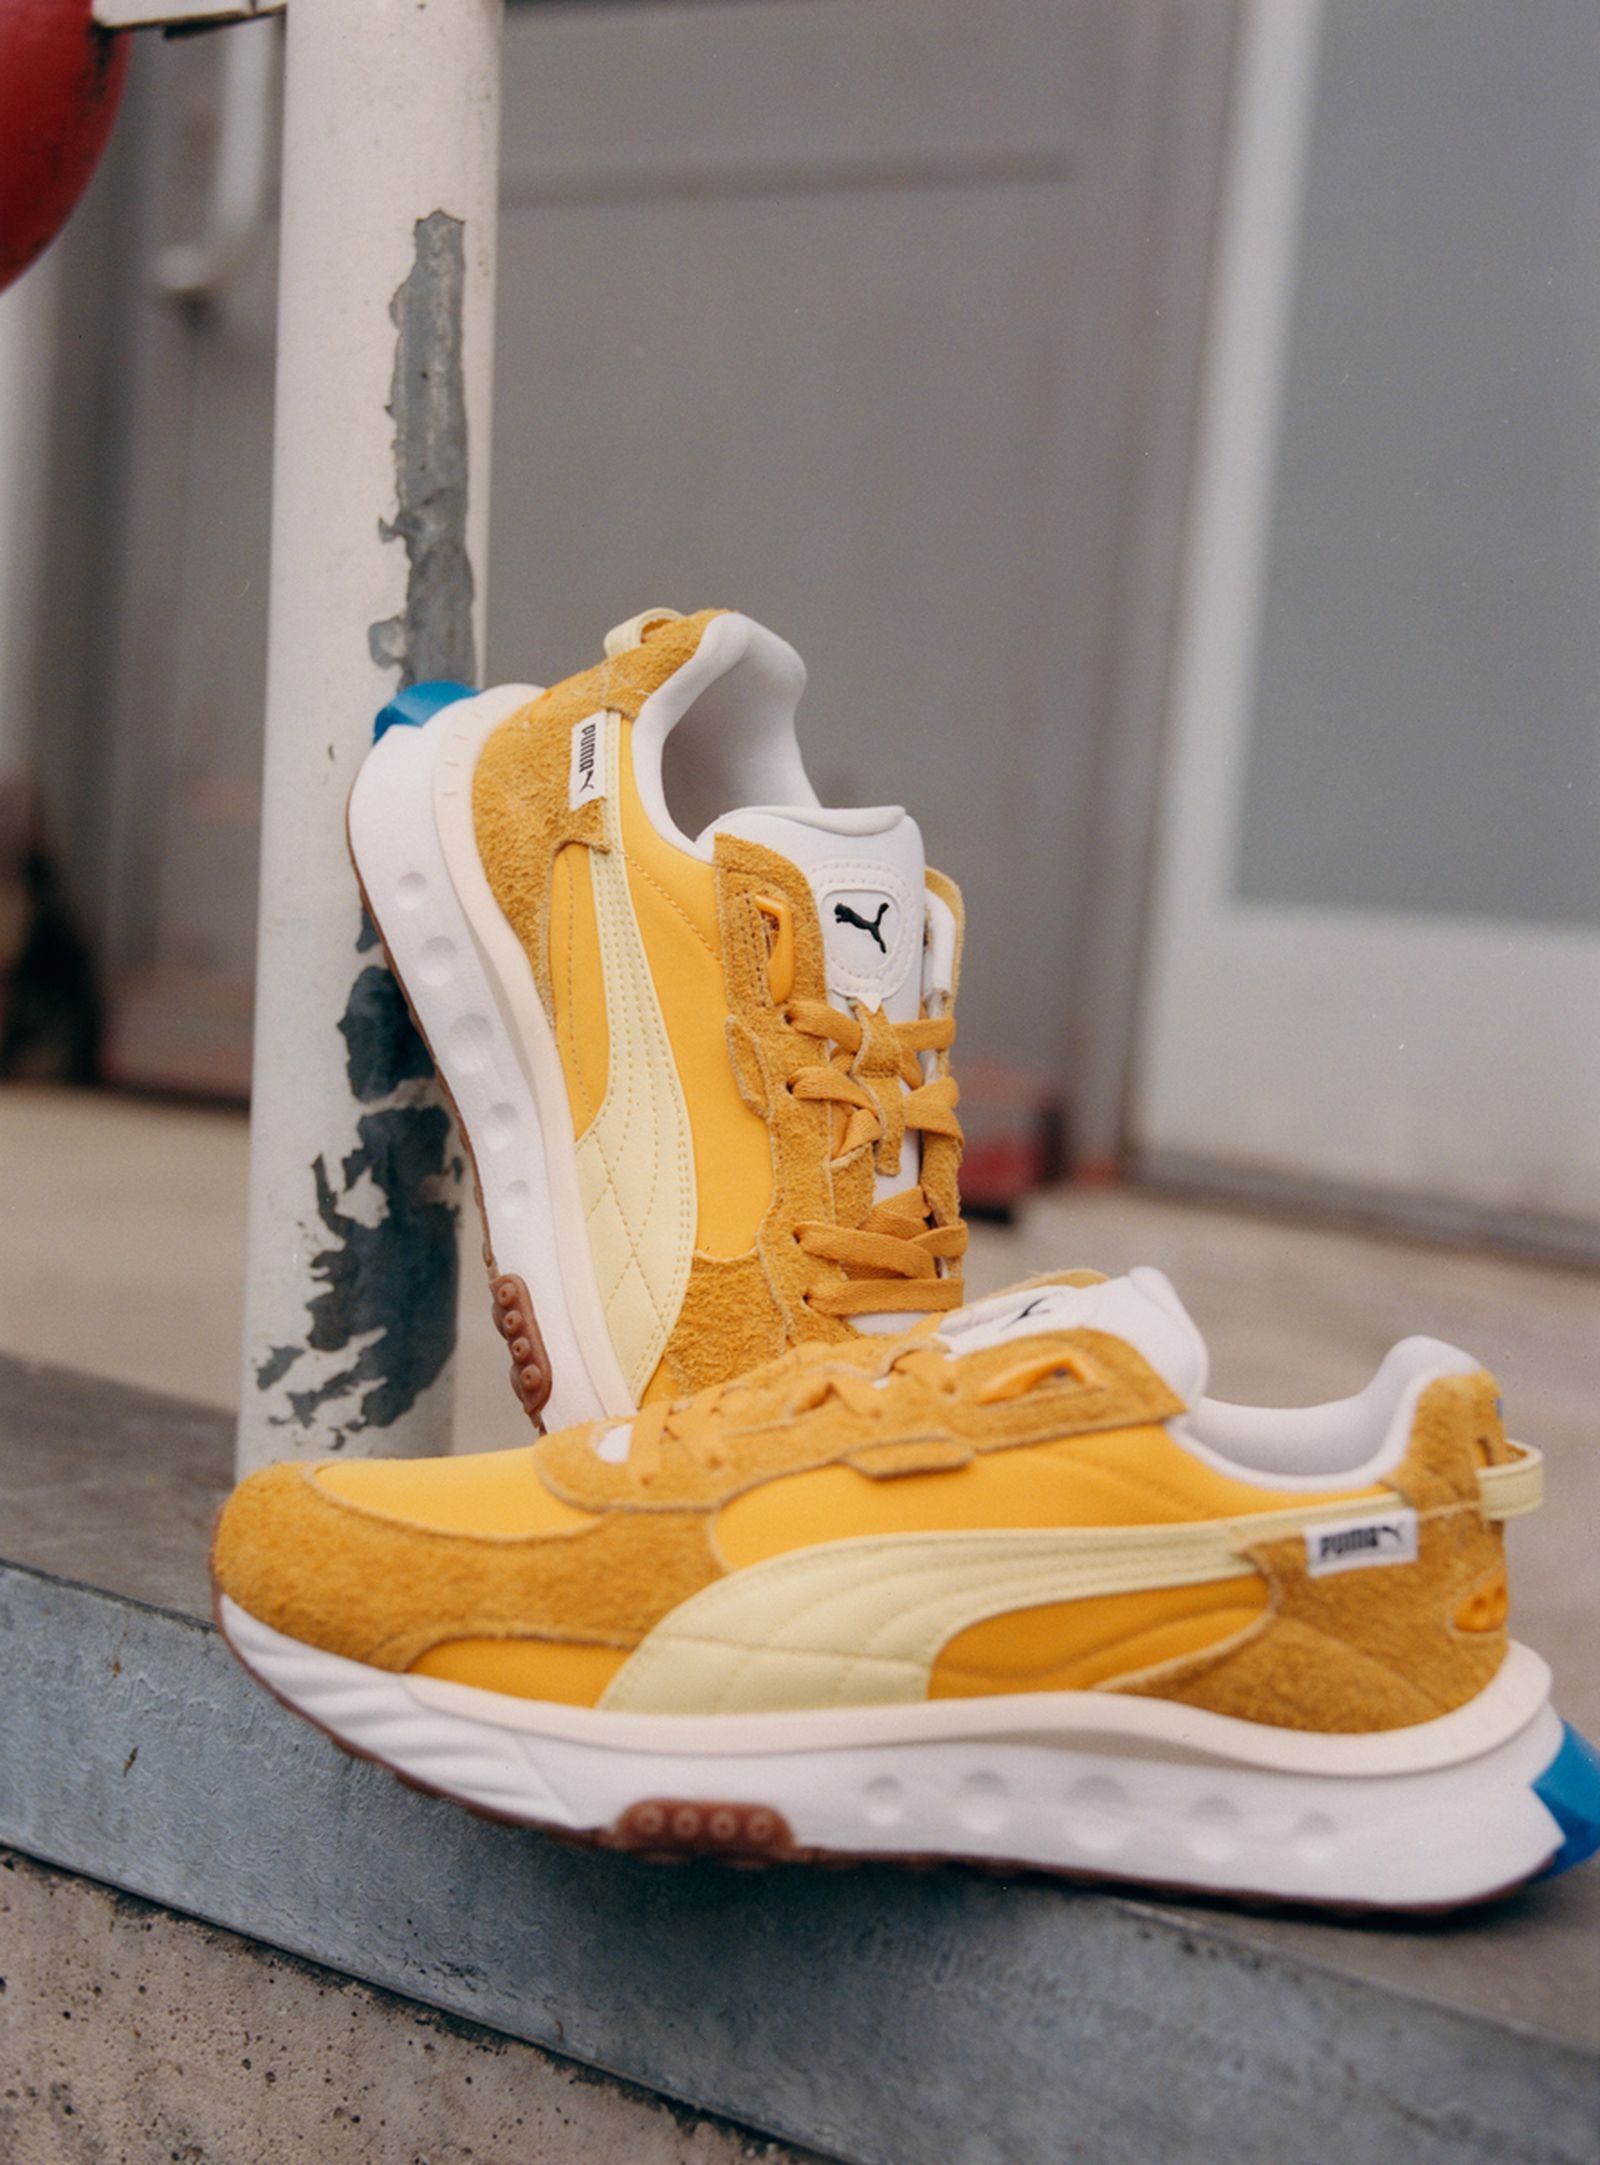 PUMA Wild Rider “Vintage”: Official Release Information & Images